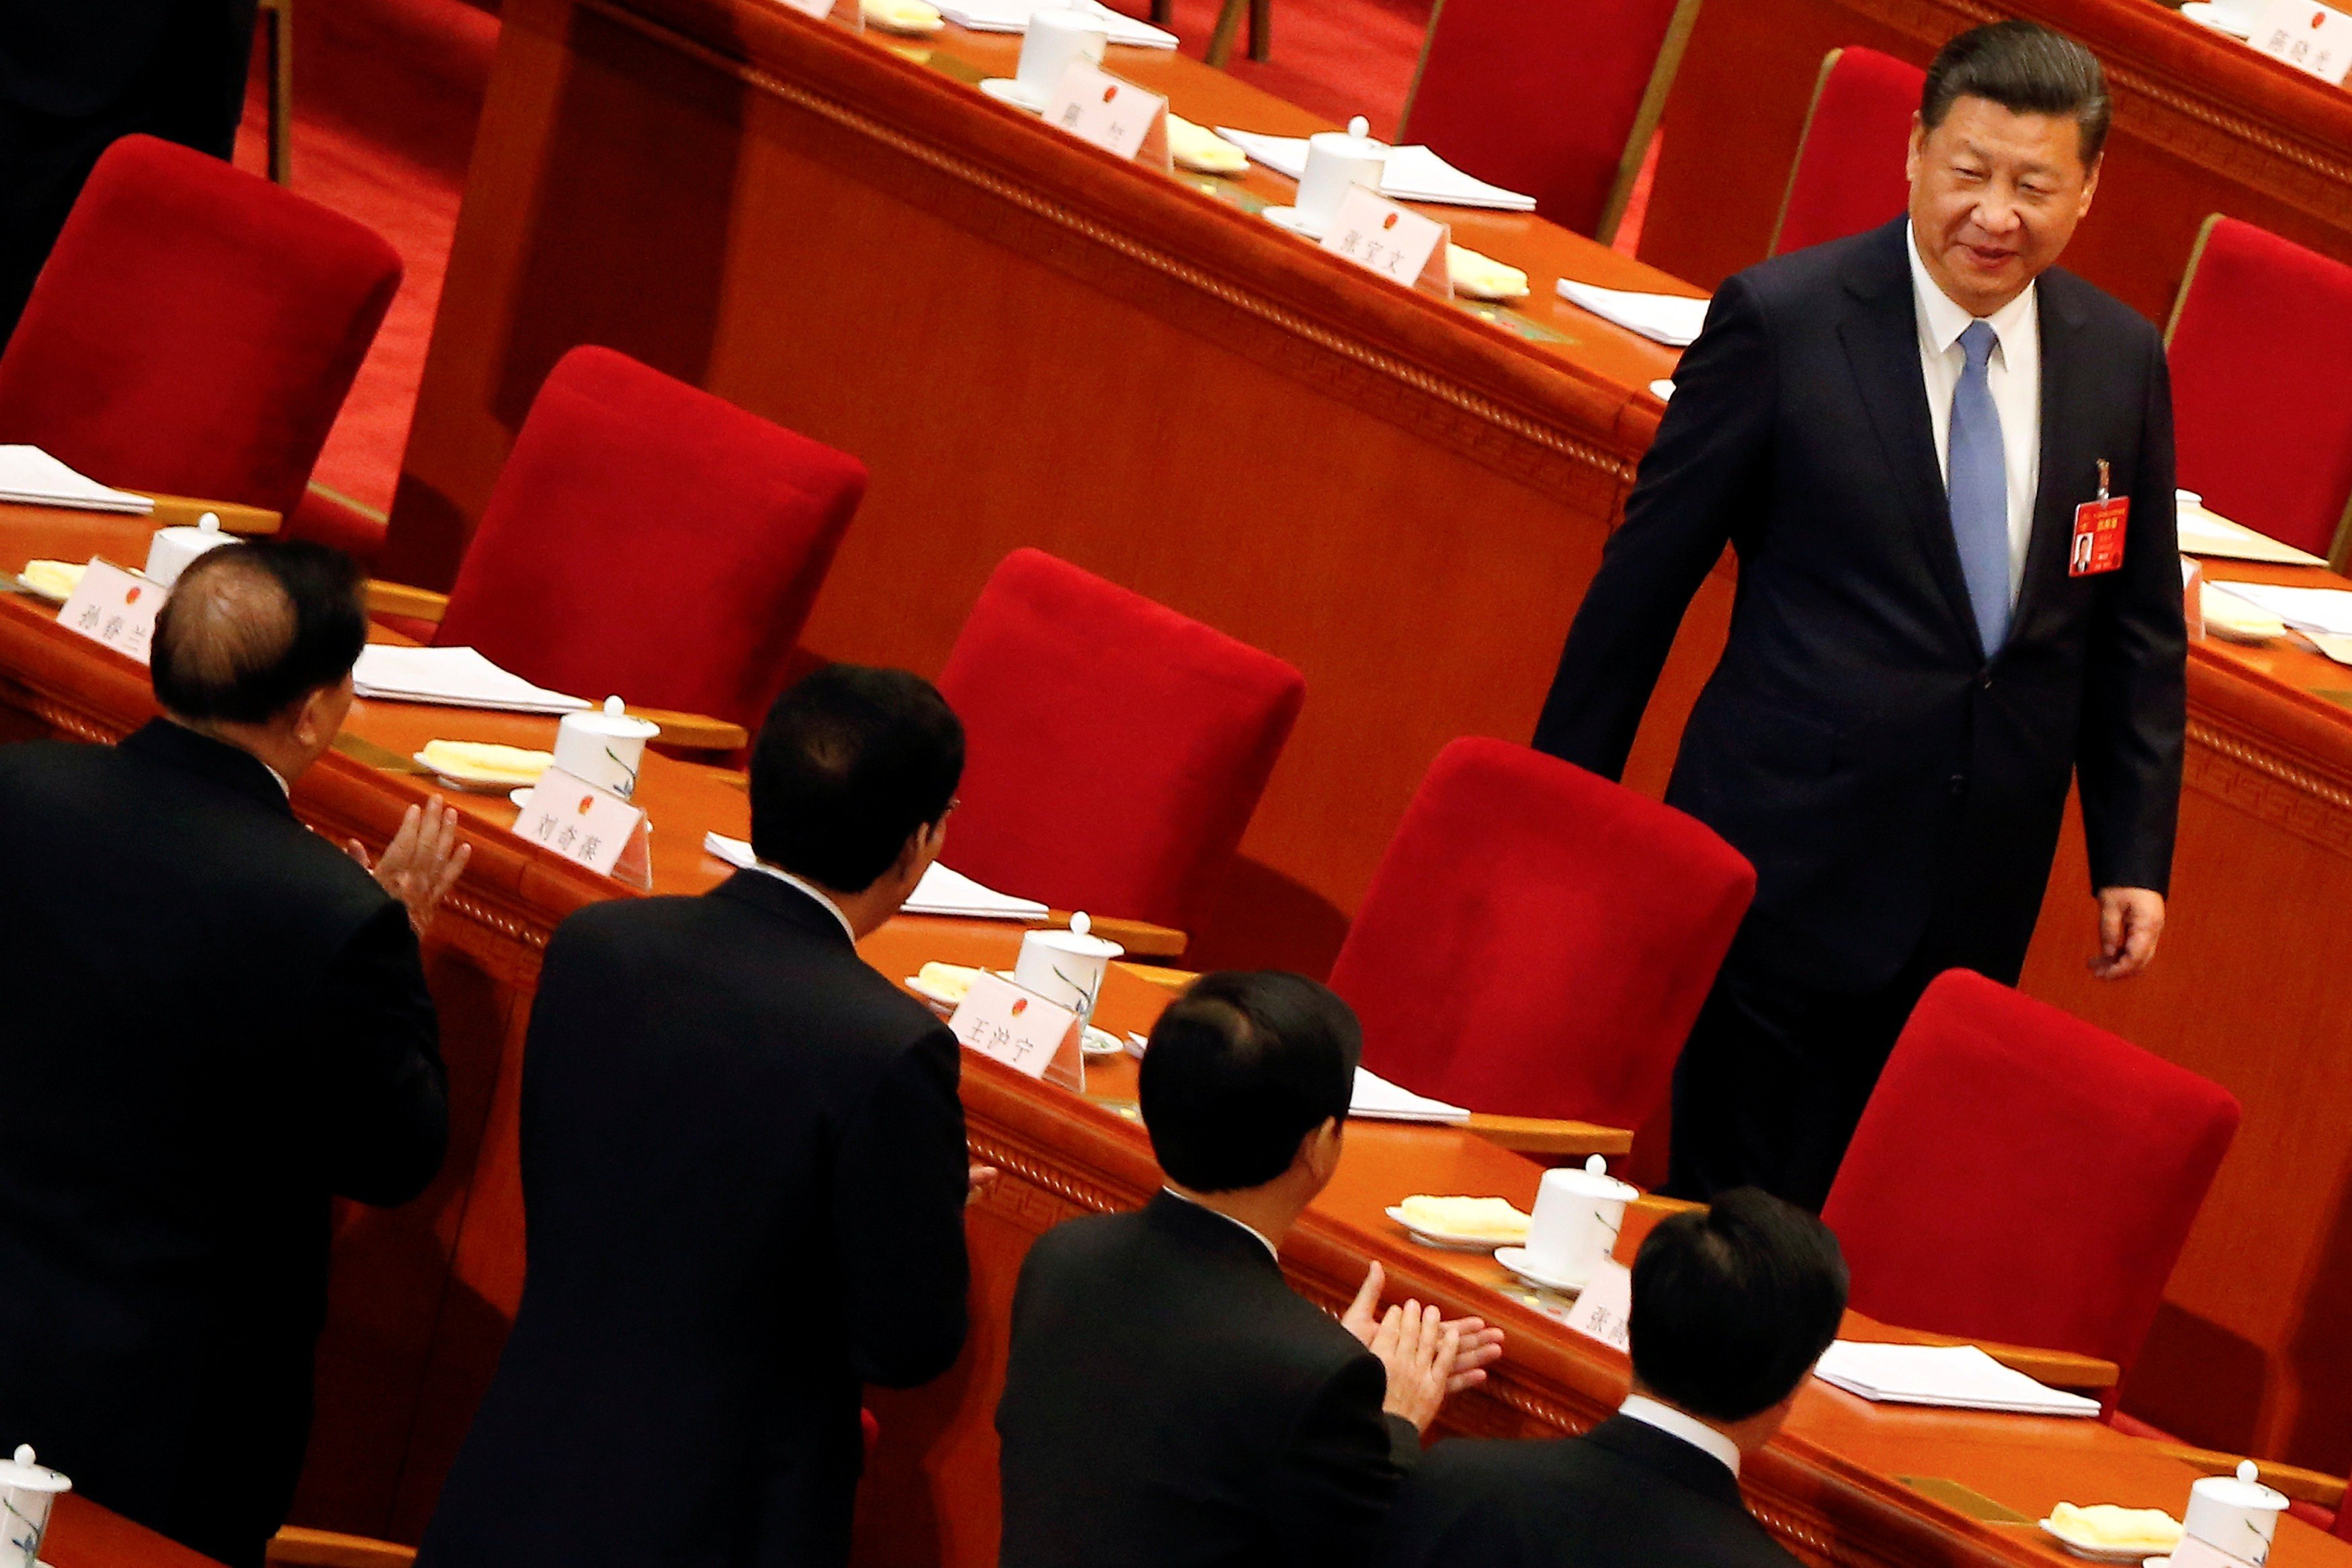 China’s President Xi Jinping launched his sweeping crackdown on graft when he first came to power five years ago. File photo: Reuters